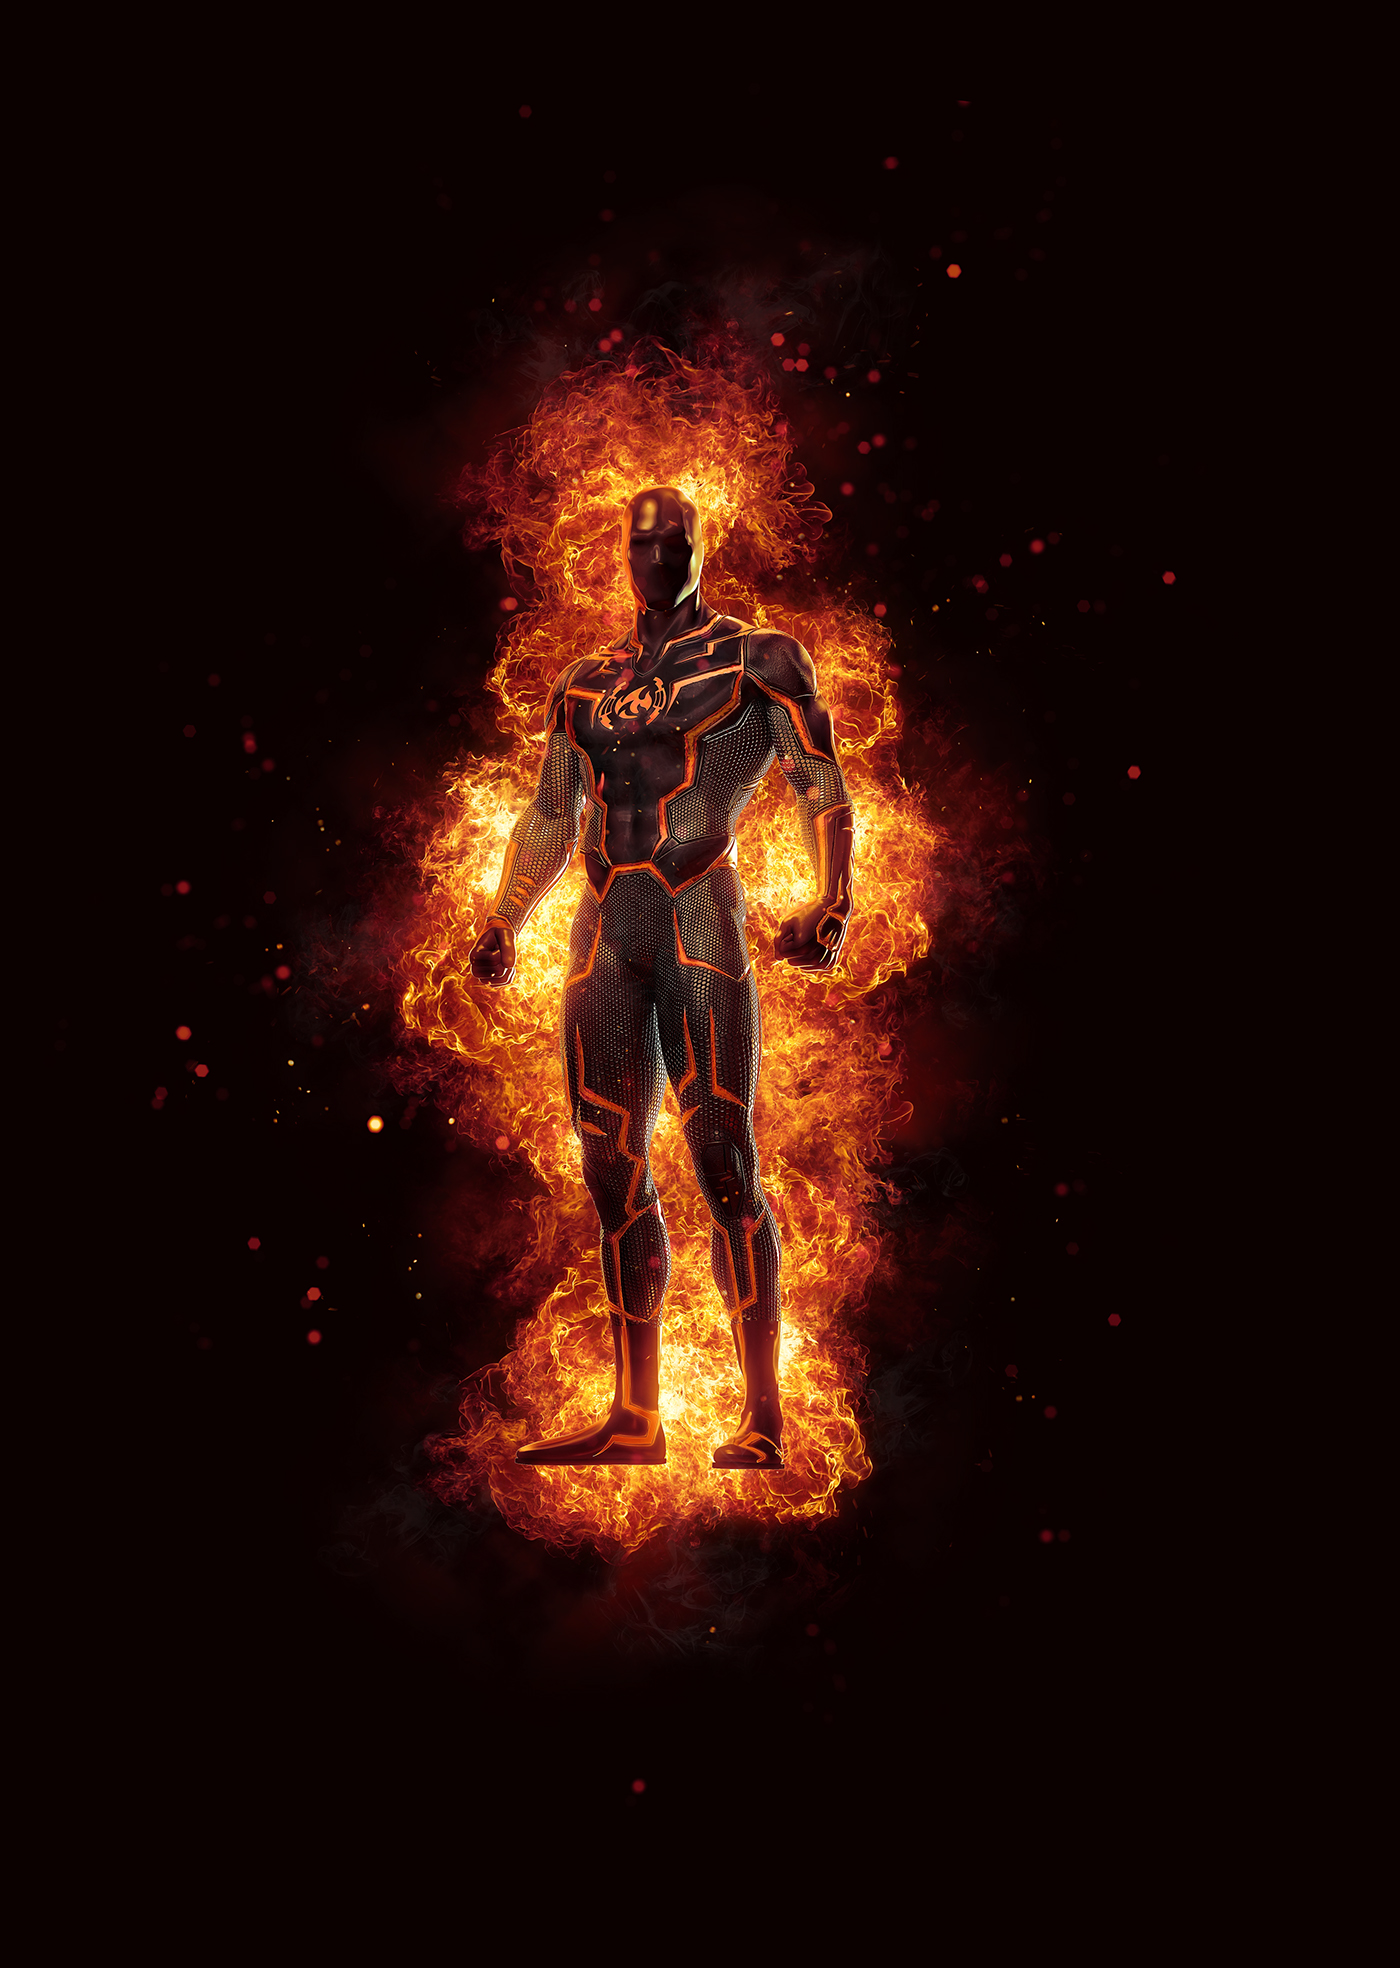 Thermo Man visual dupont nomex art direction  fire creative islam shipl